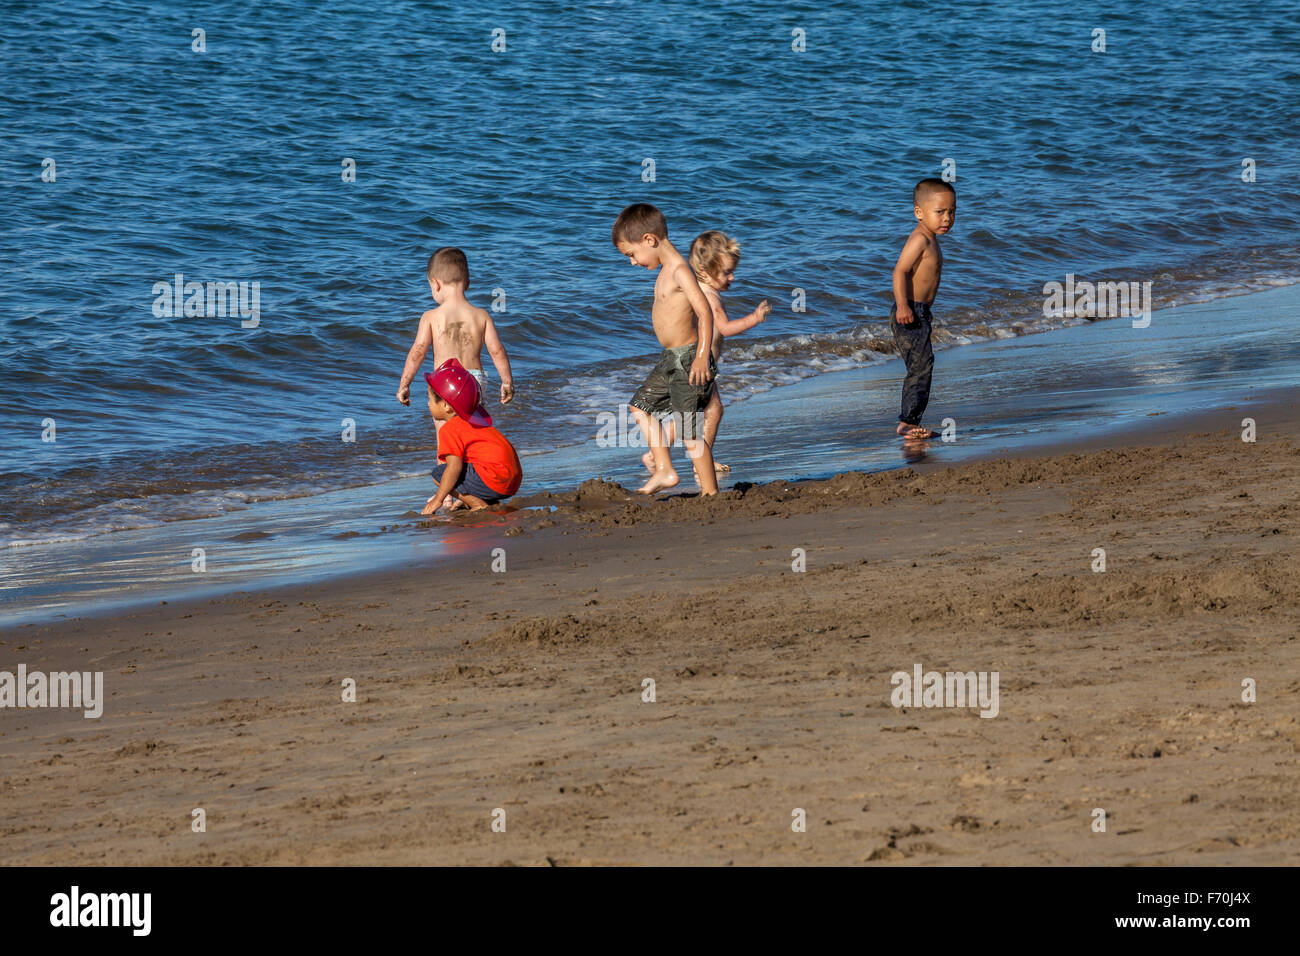 Children playing at a beach in San Francisco, California, USA Stock Photo